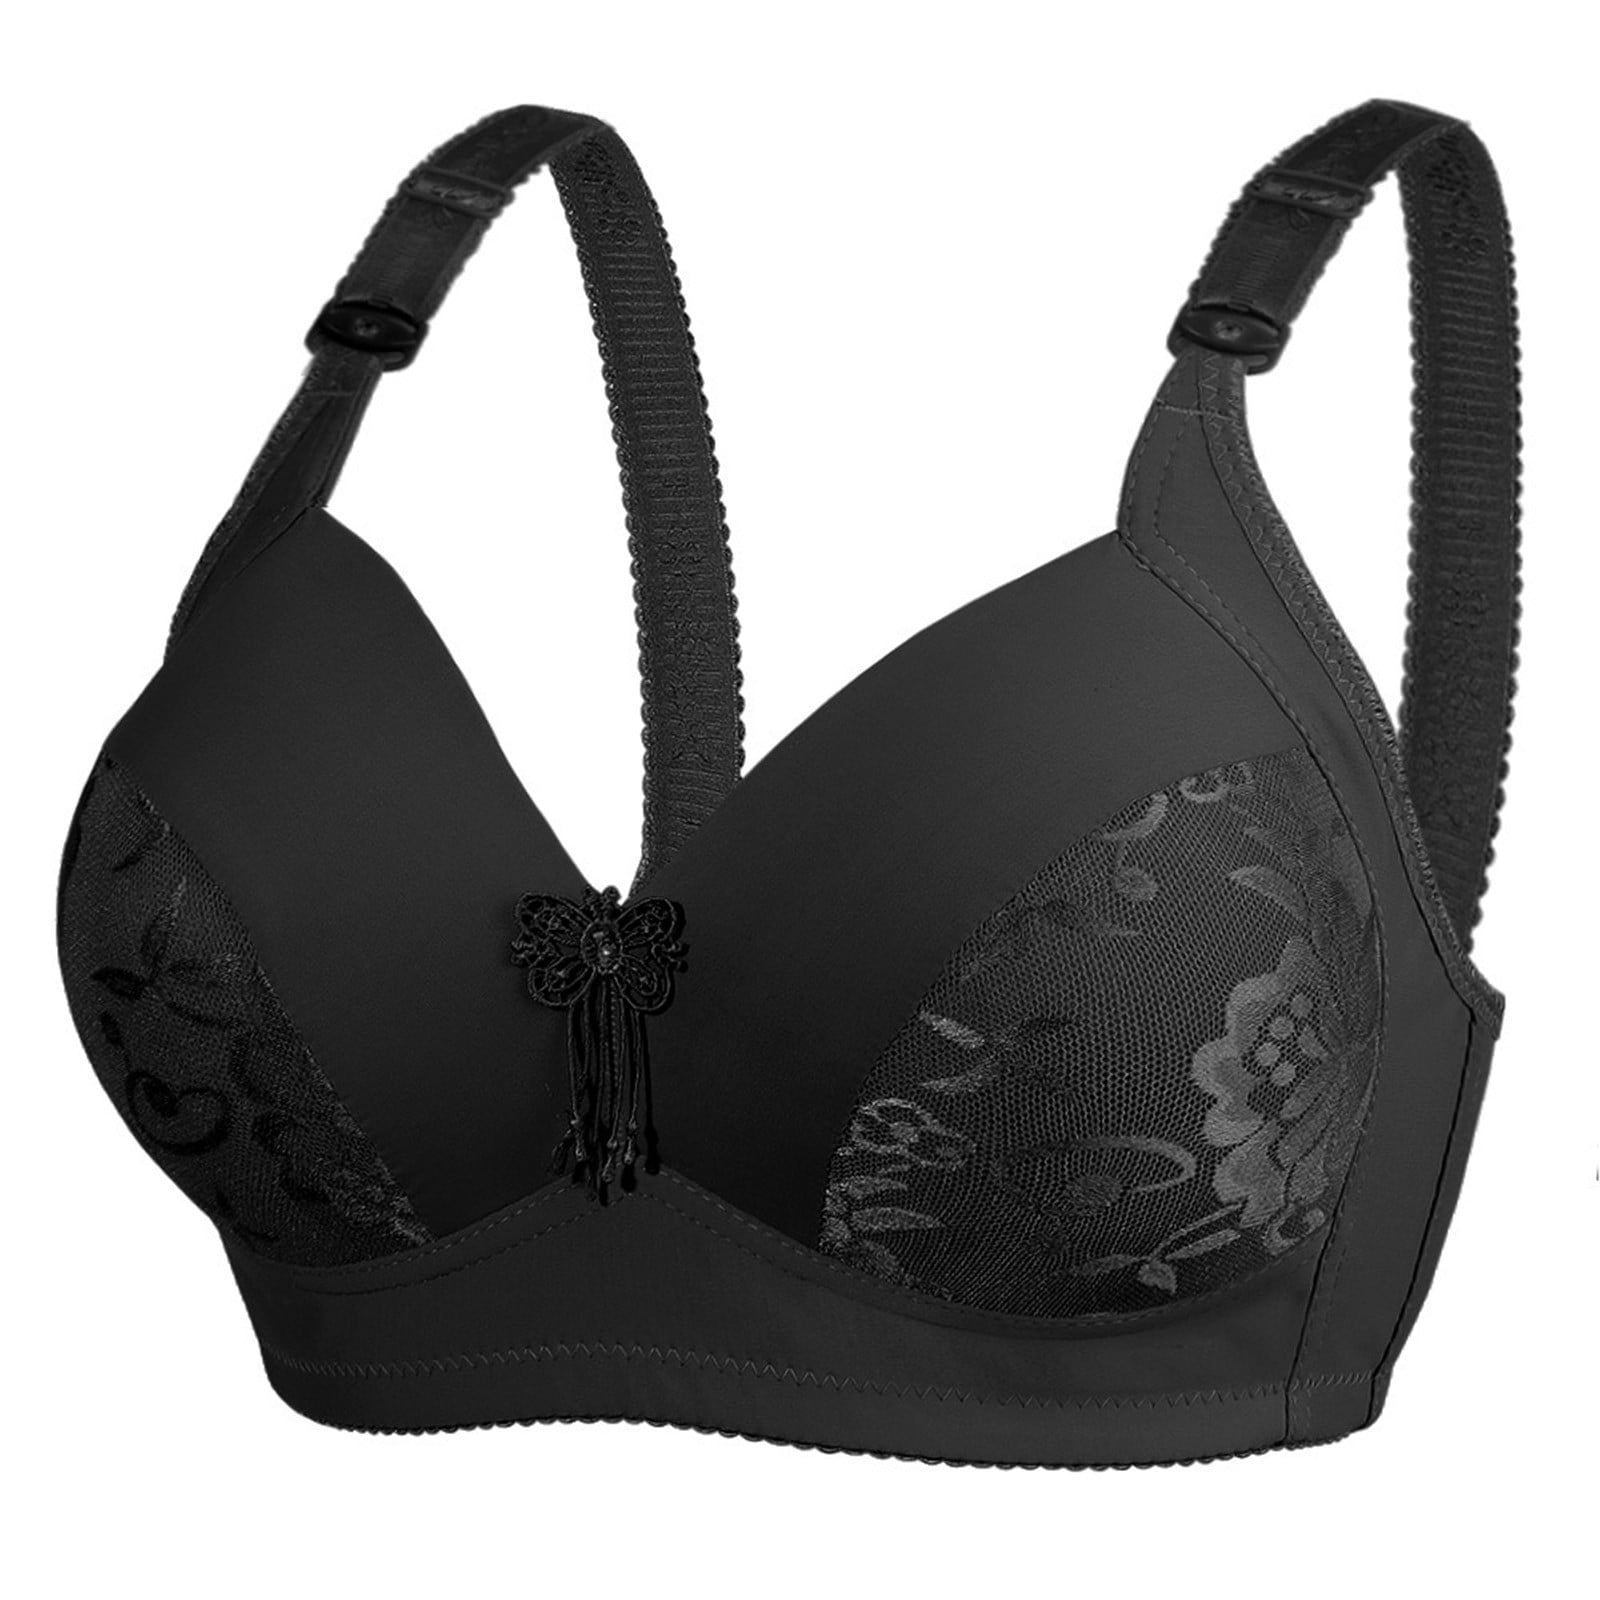 Mlqidk Women's Minimizer Bras Wirefree Bra with Support, Full-Coverage  Wireless Bra for Everyday Comfort,Black L 